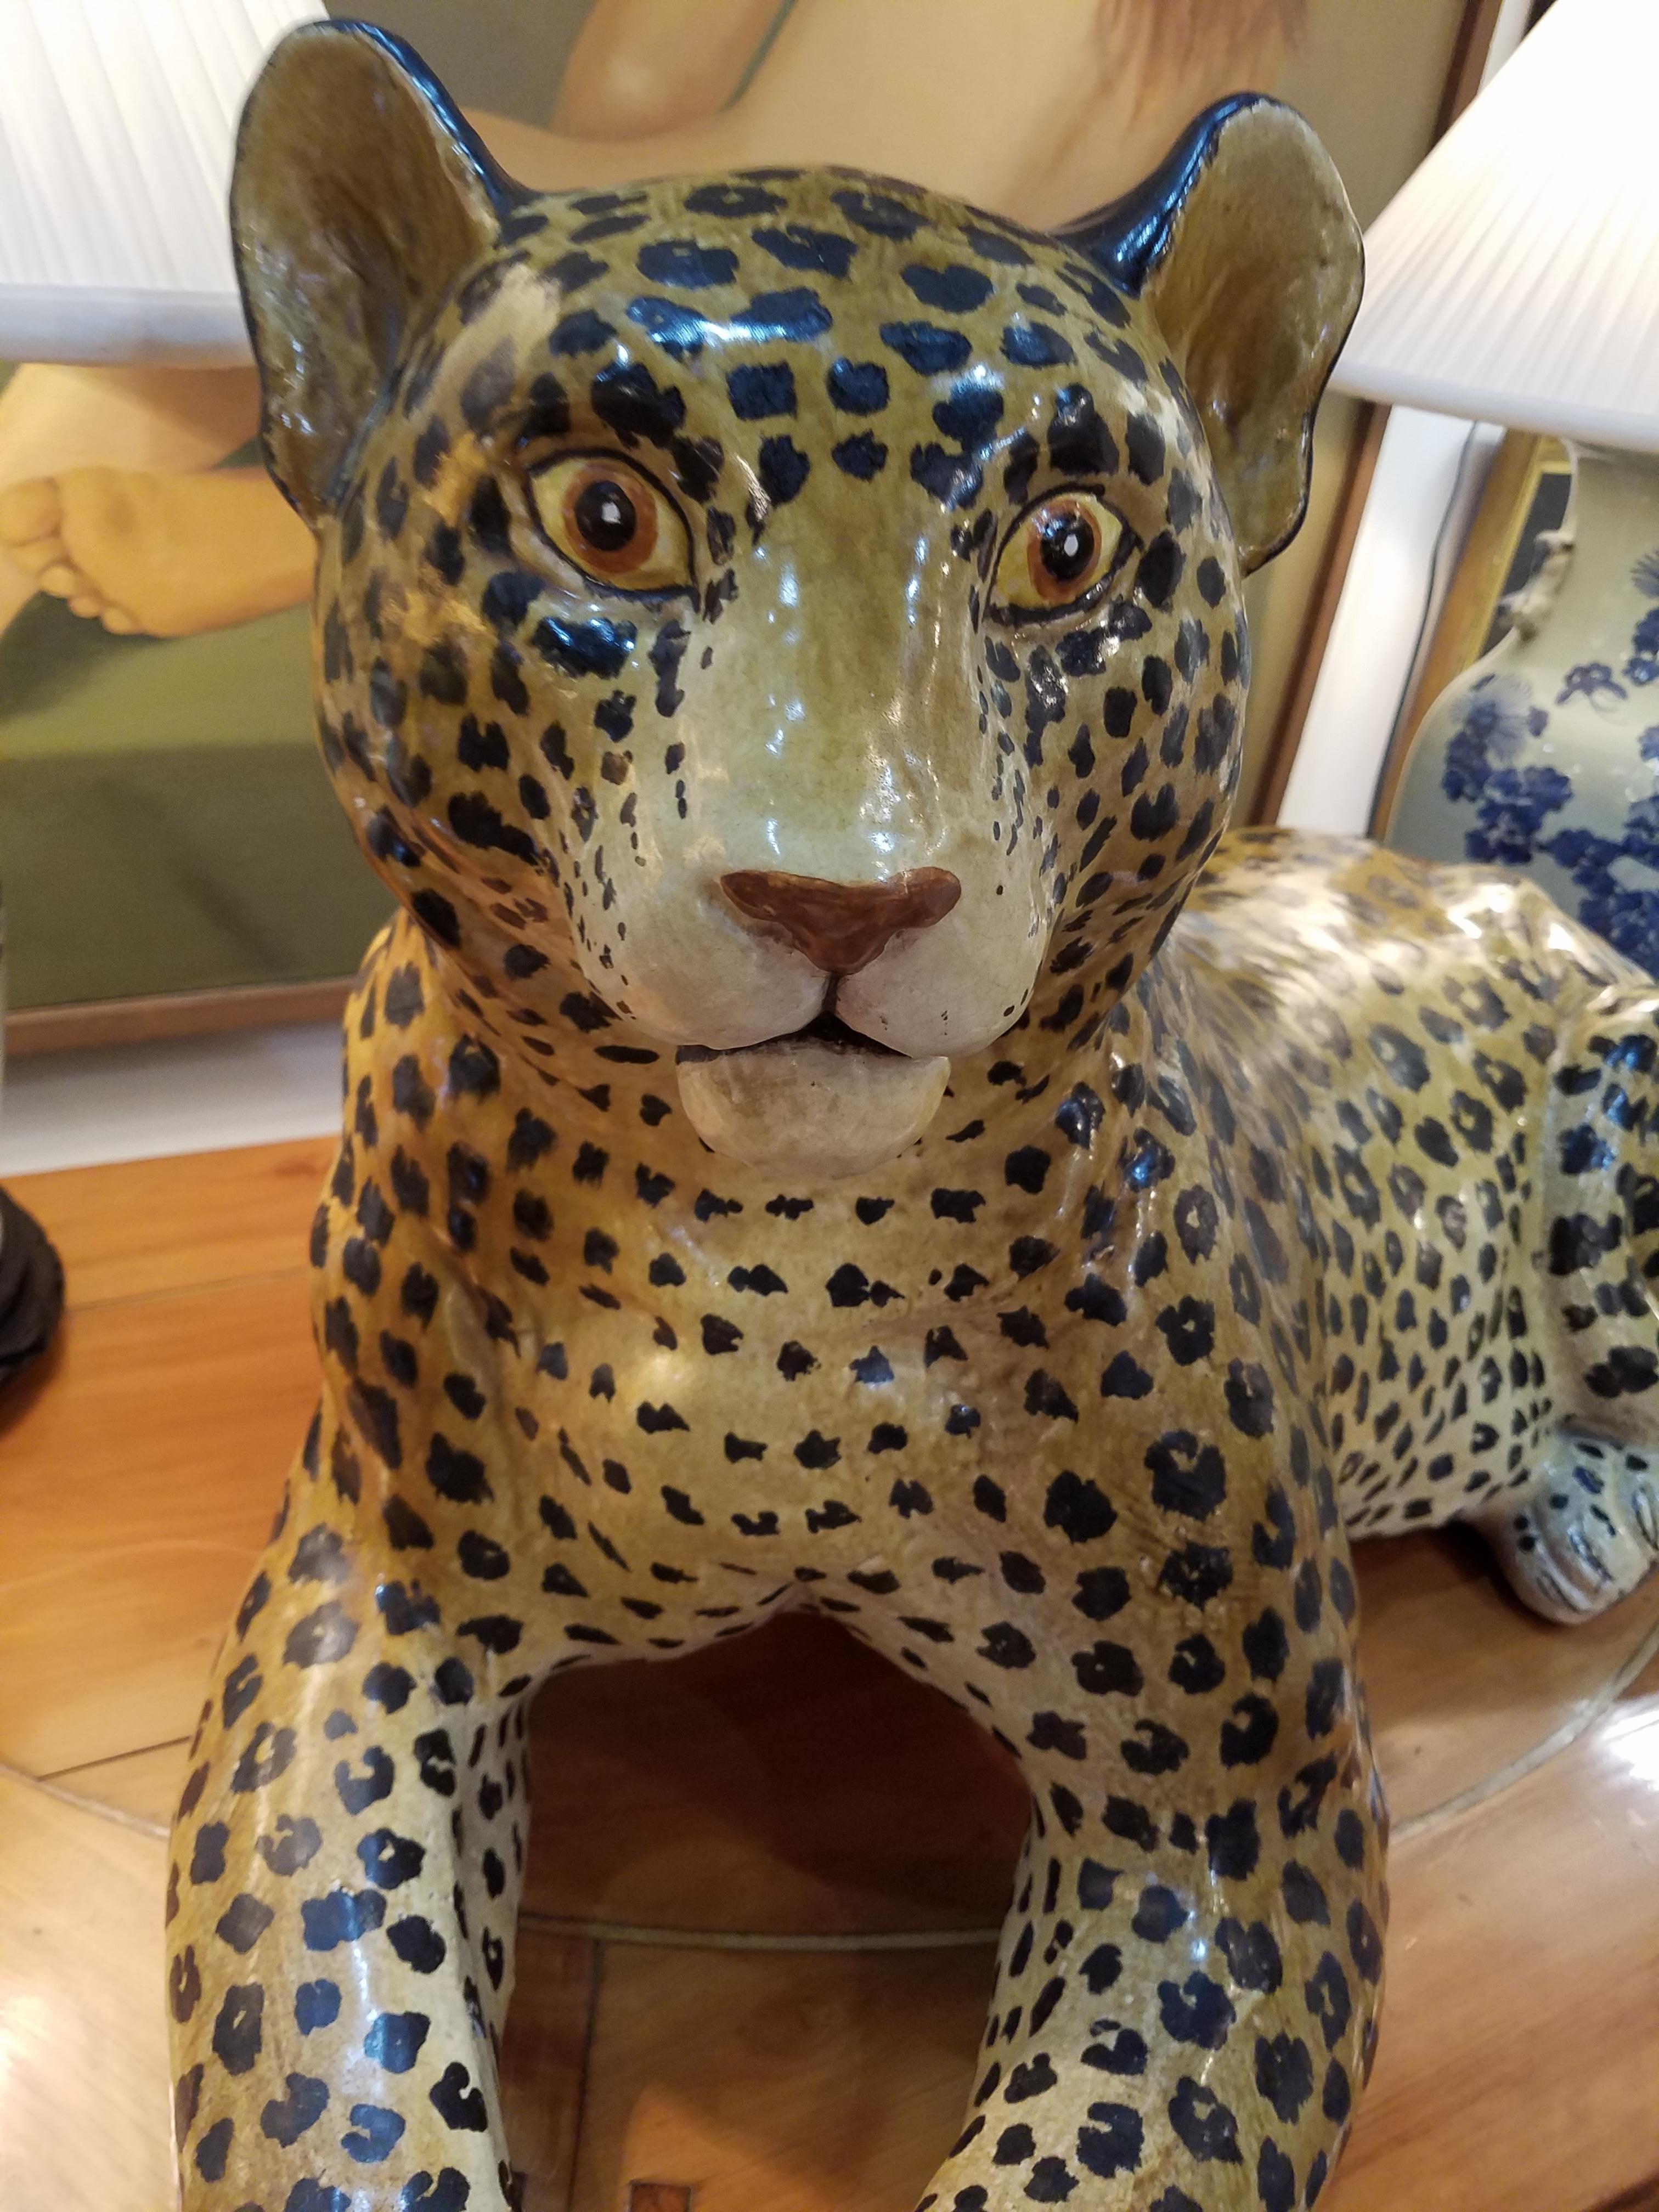 Wonderful midcentury Italian reclining cheetah or leopard. Large size statement piece. Signed Italy underneath.

Measures: 37